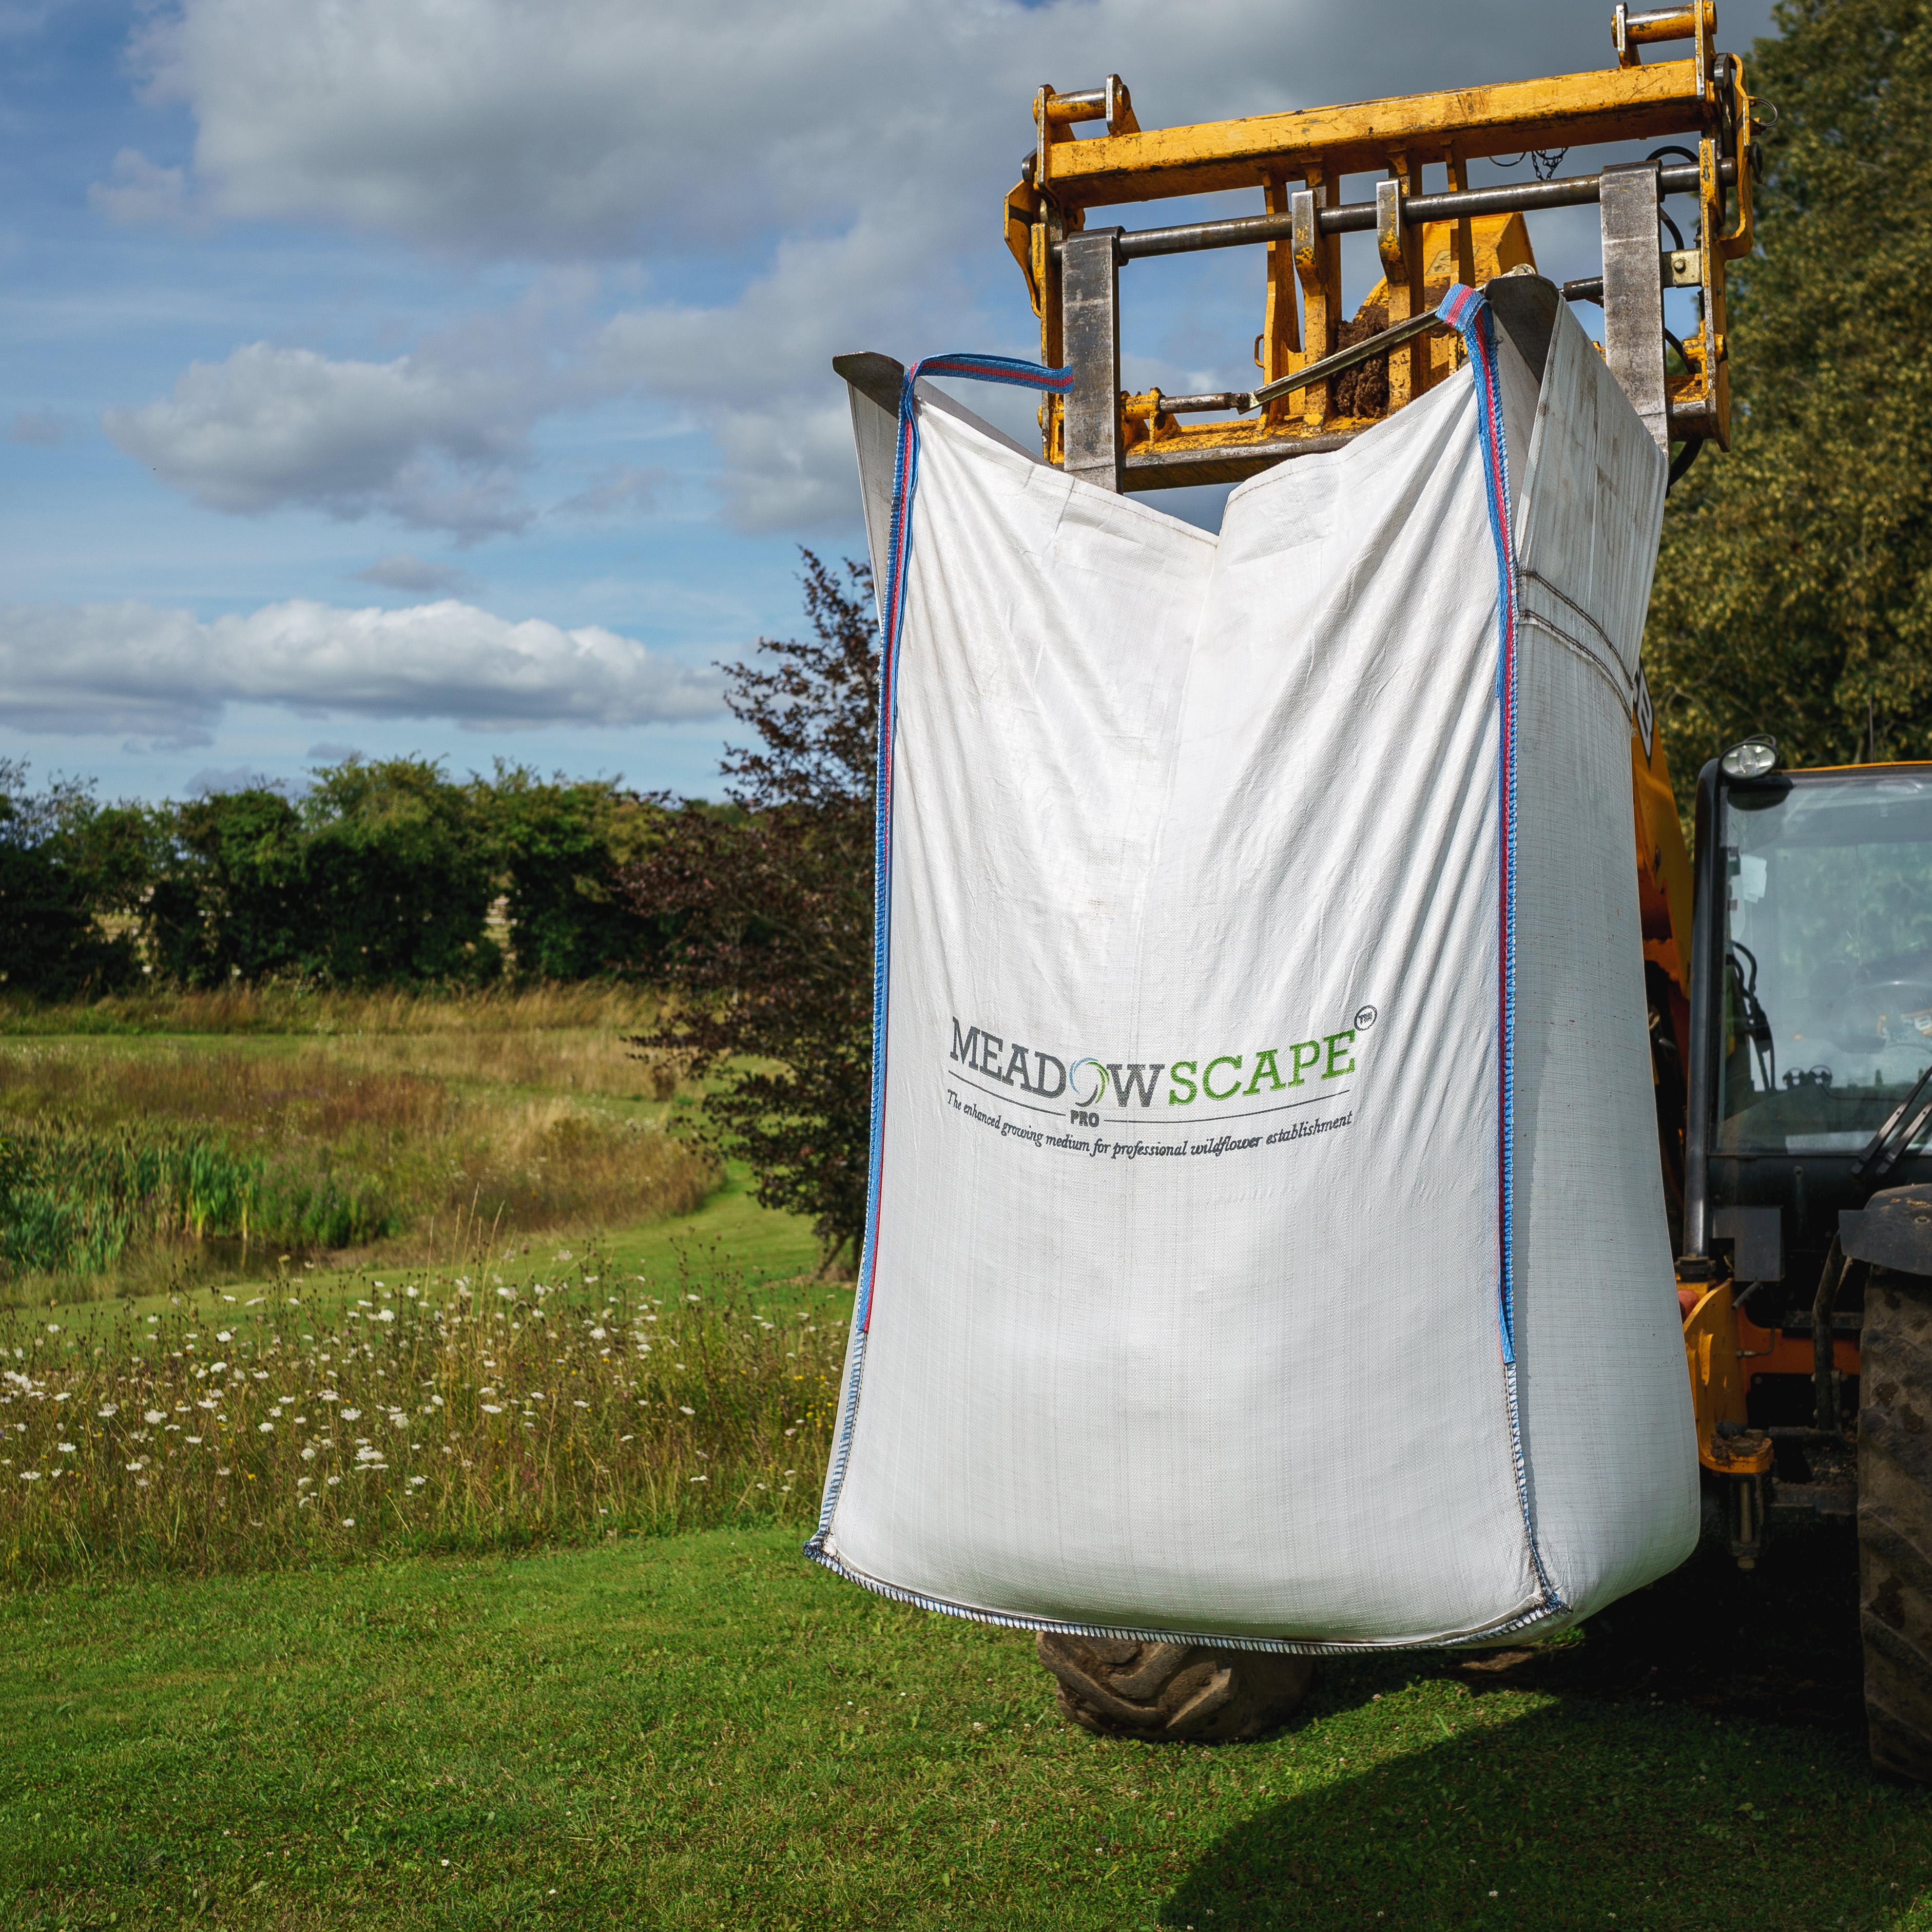 A large dumpy bag of Meadowscape Pro held up by a forklift with wildflowers in the background